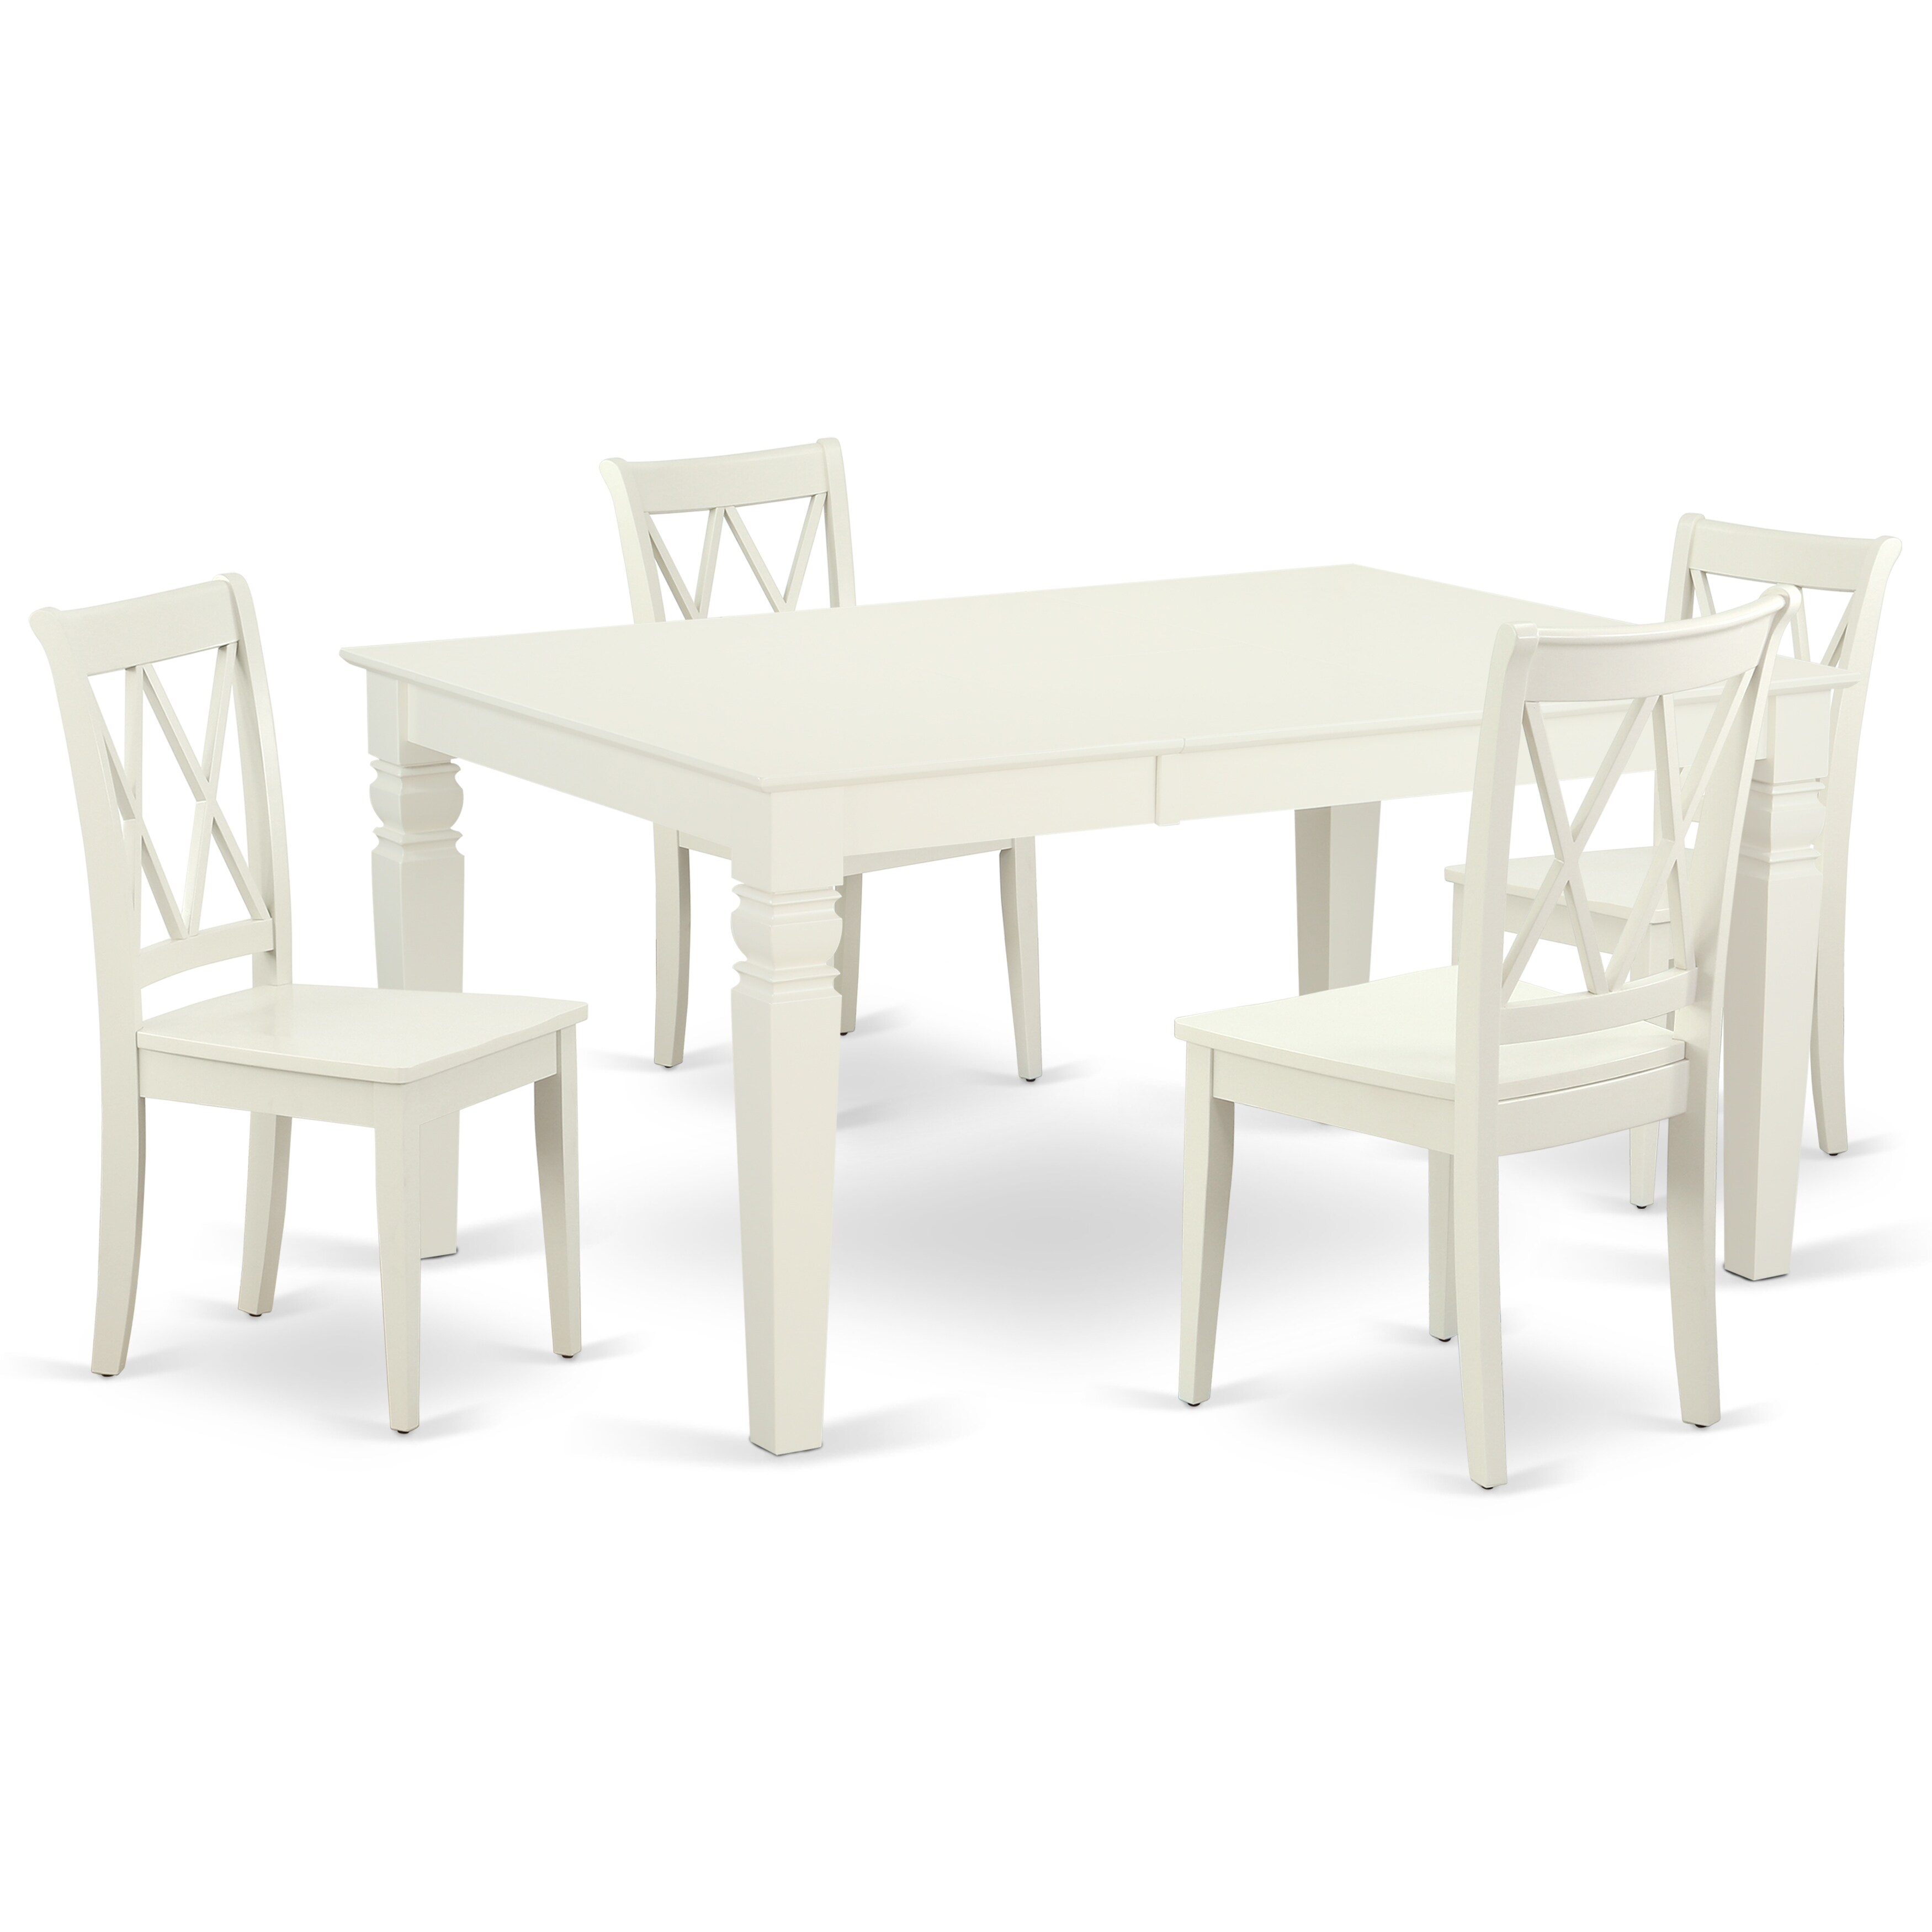 East West Furniture Dining Room Table Set - A Rectangle Kitchen Table and Dining Chairs, 42x60 Inch, Linen White(Pieces Option)